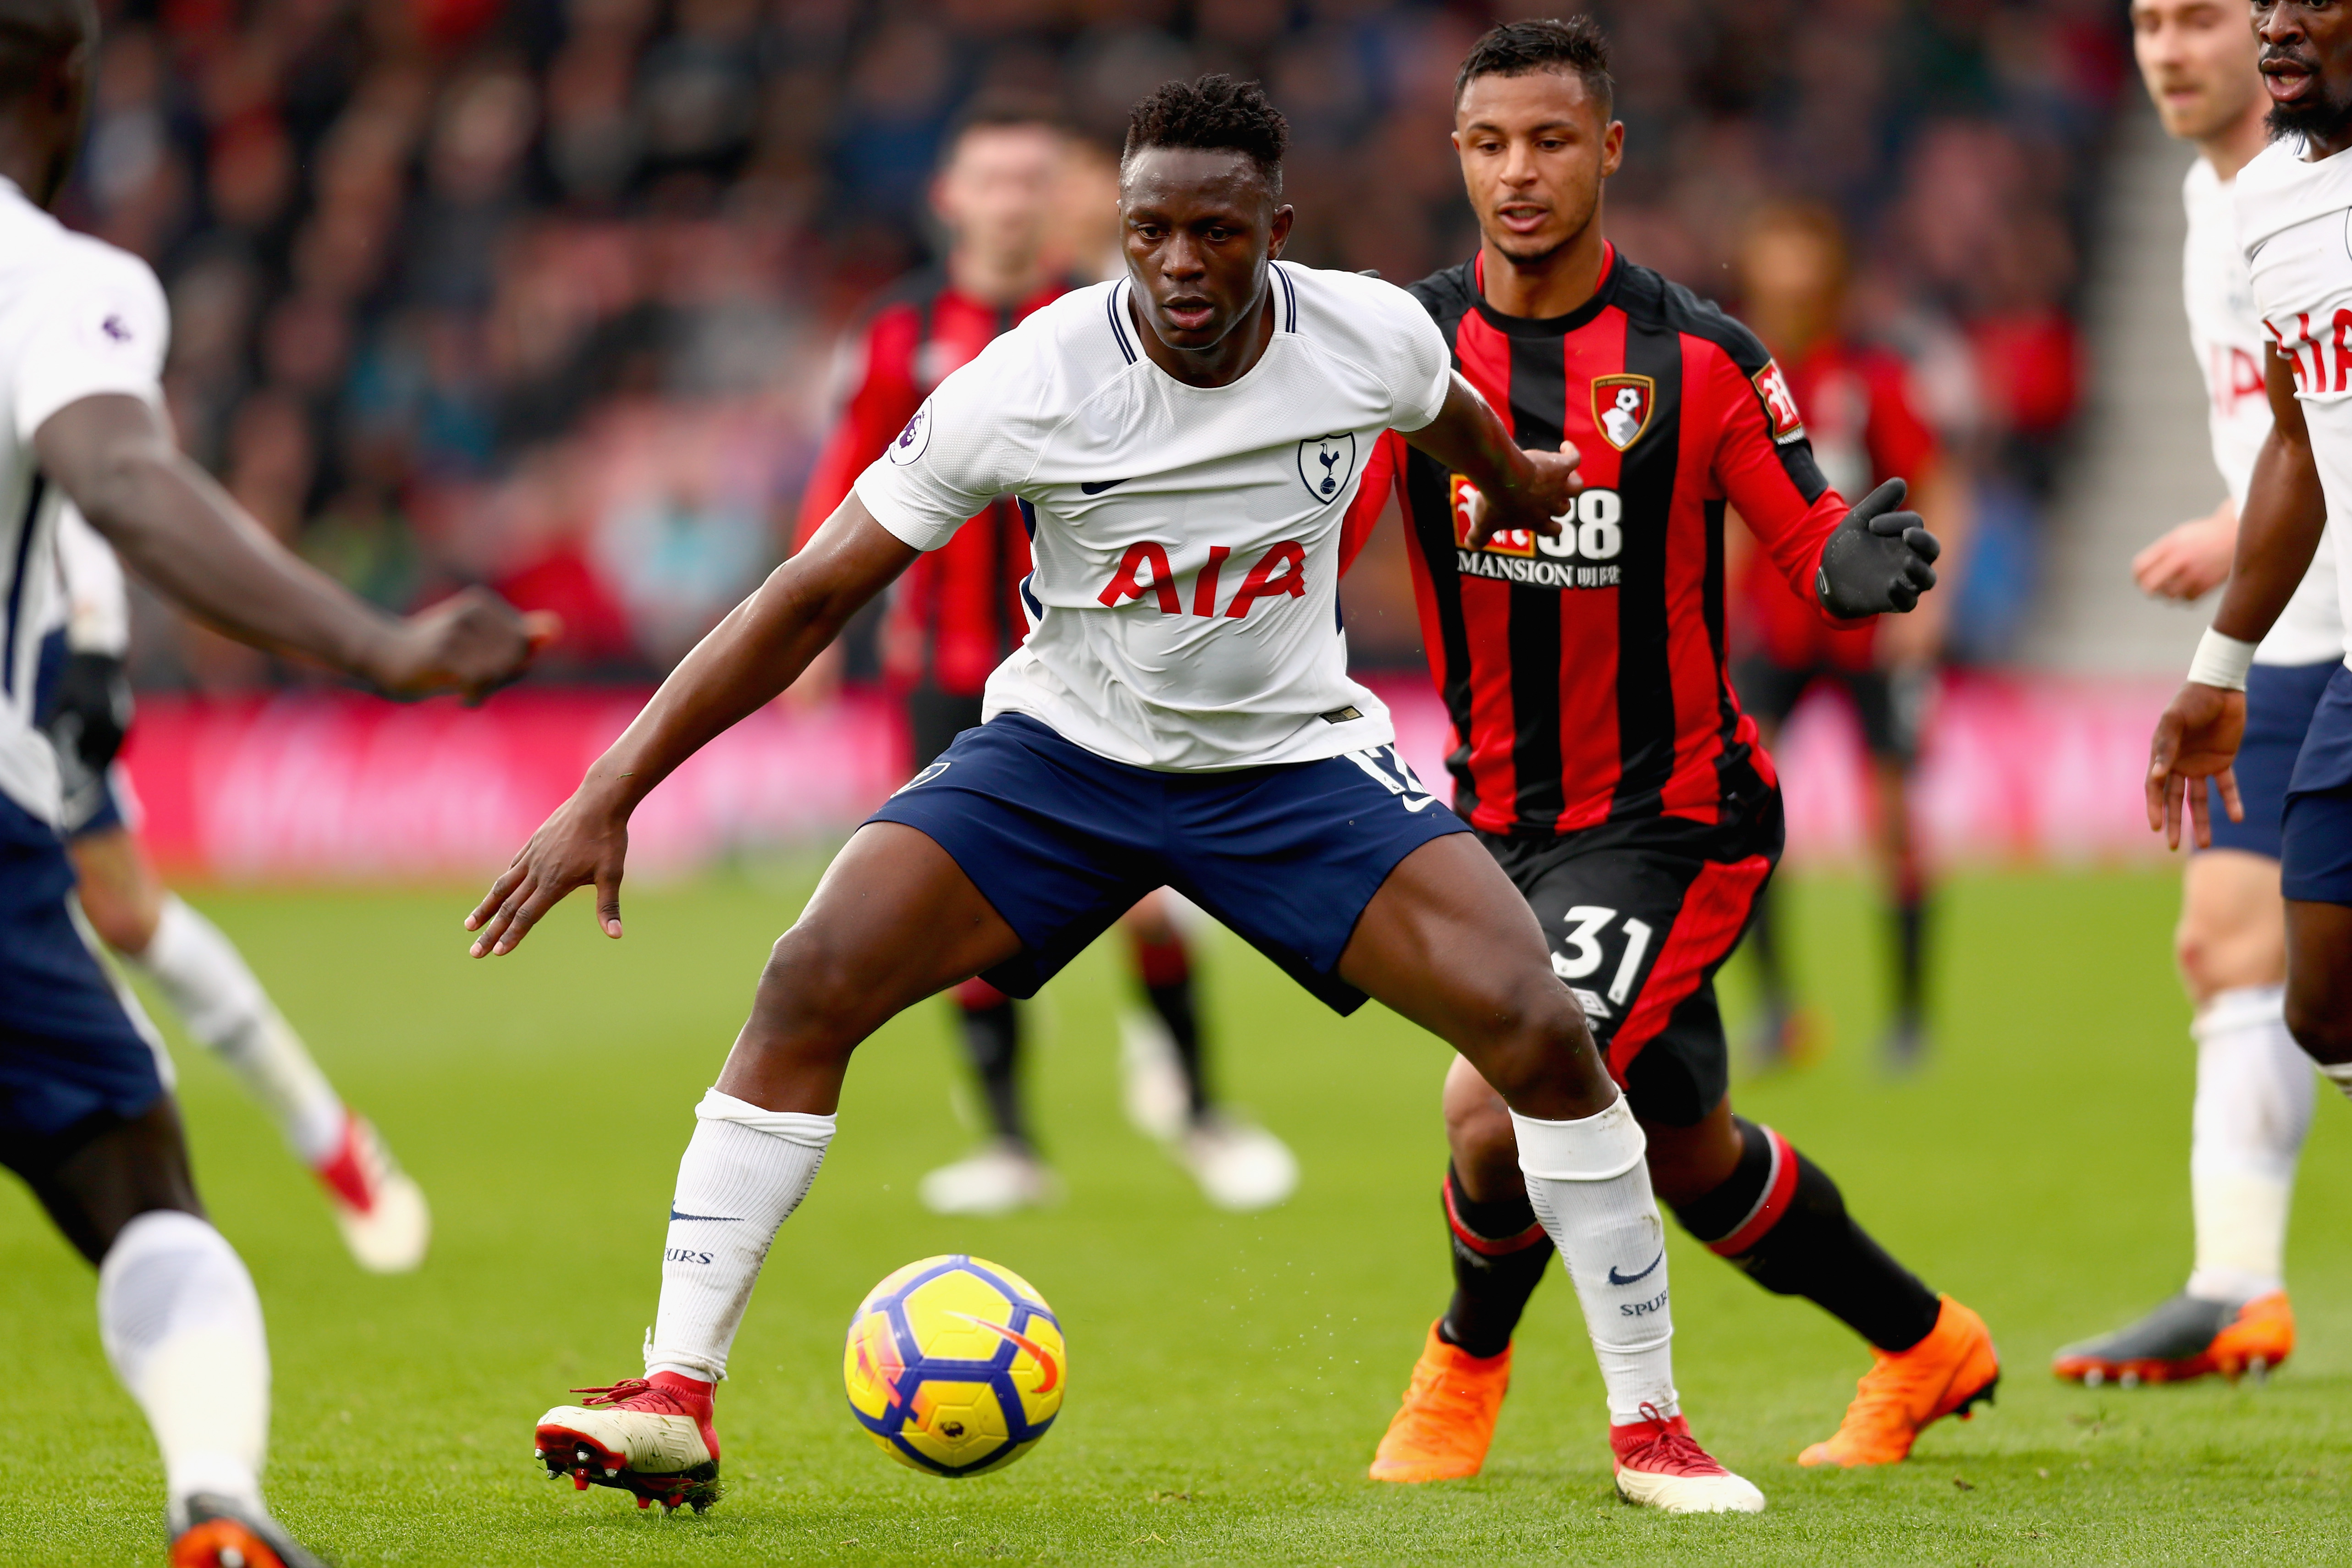 Tottenham vs Bournemouth: 4 things we learned - one man club?